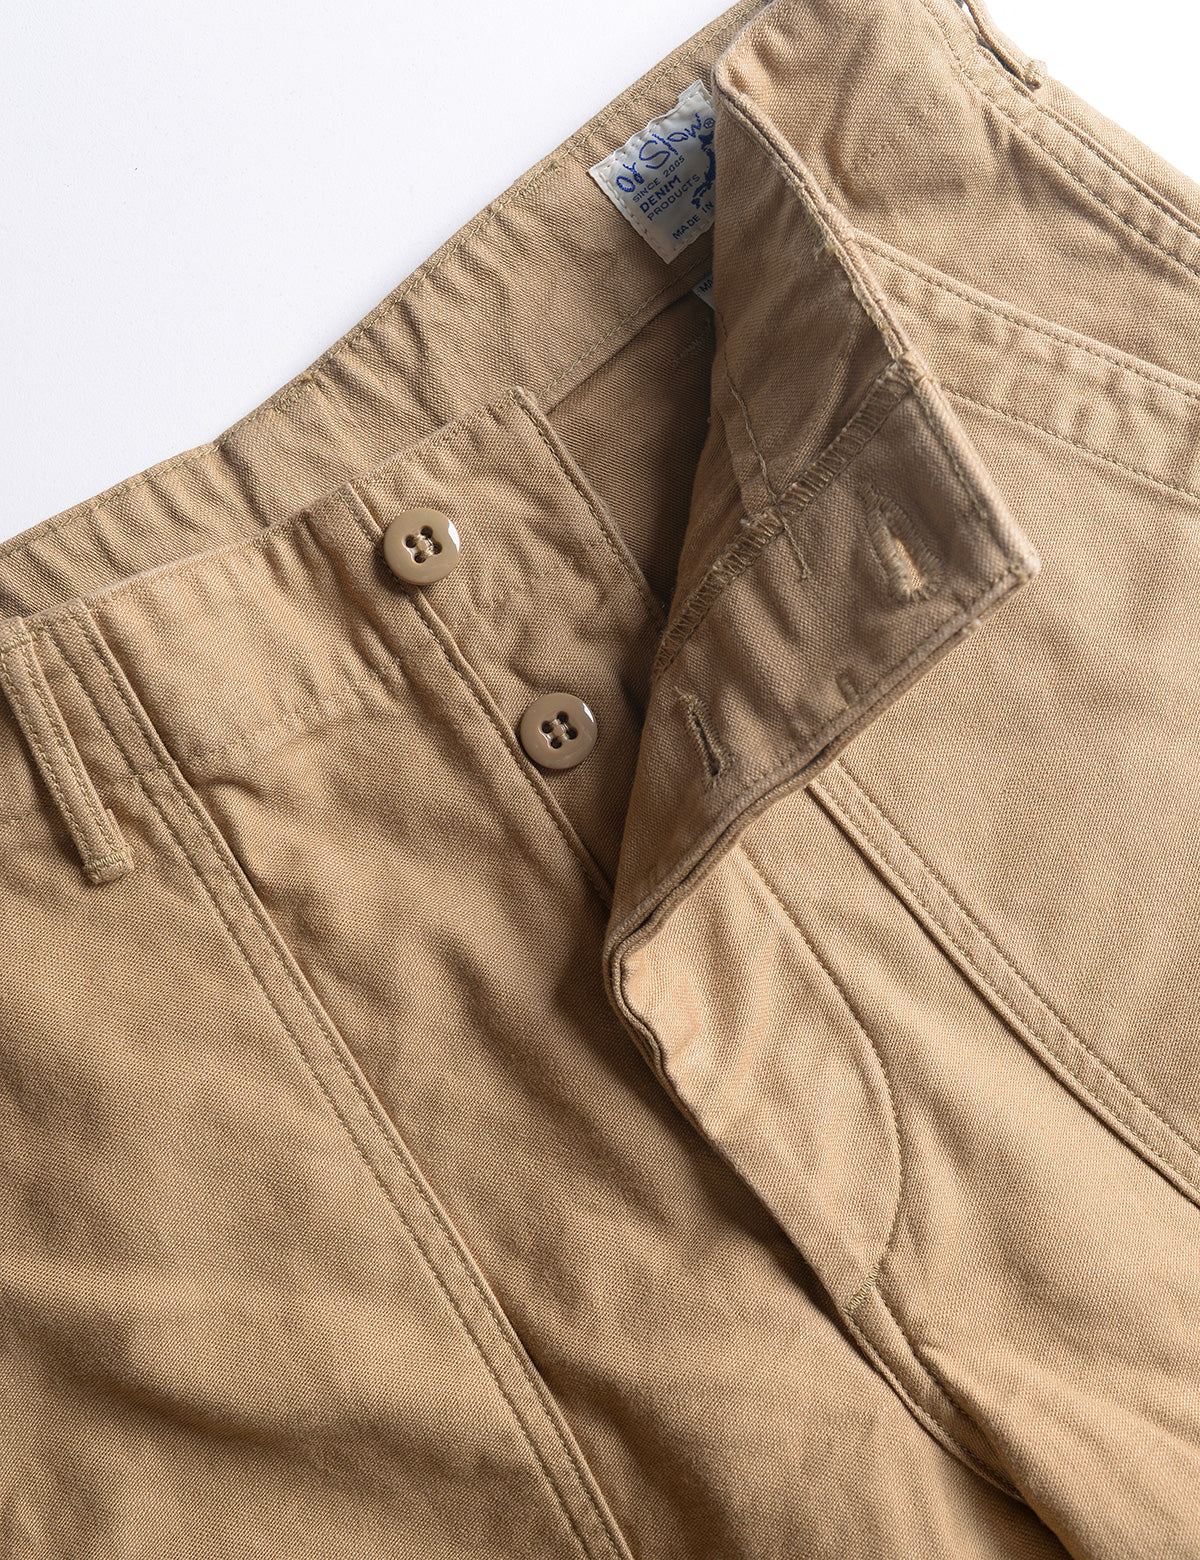 Unbuttoned fly of Orslow US Army Fatigue Trousers - Khaki